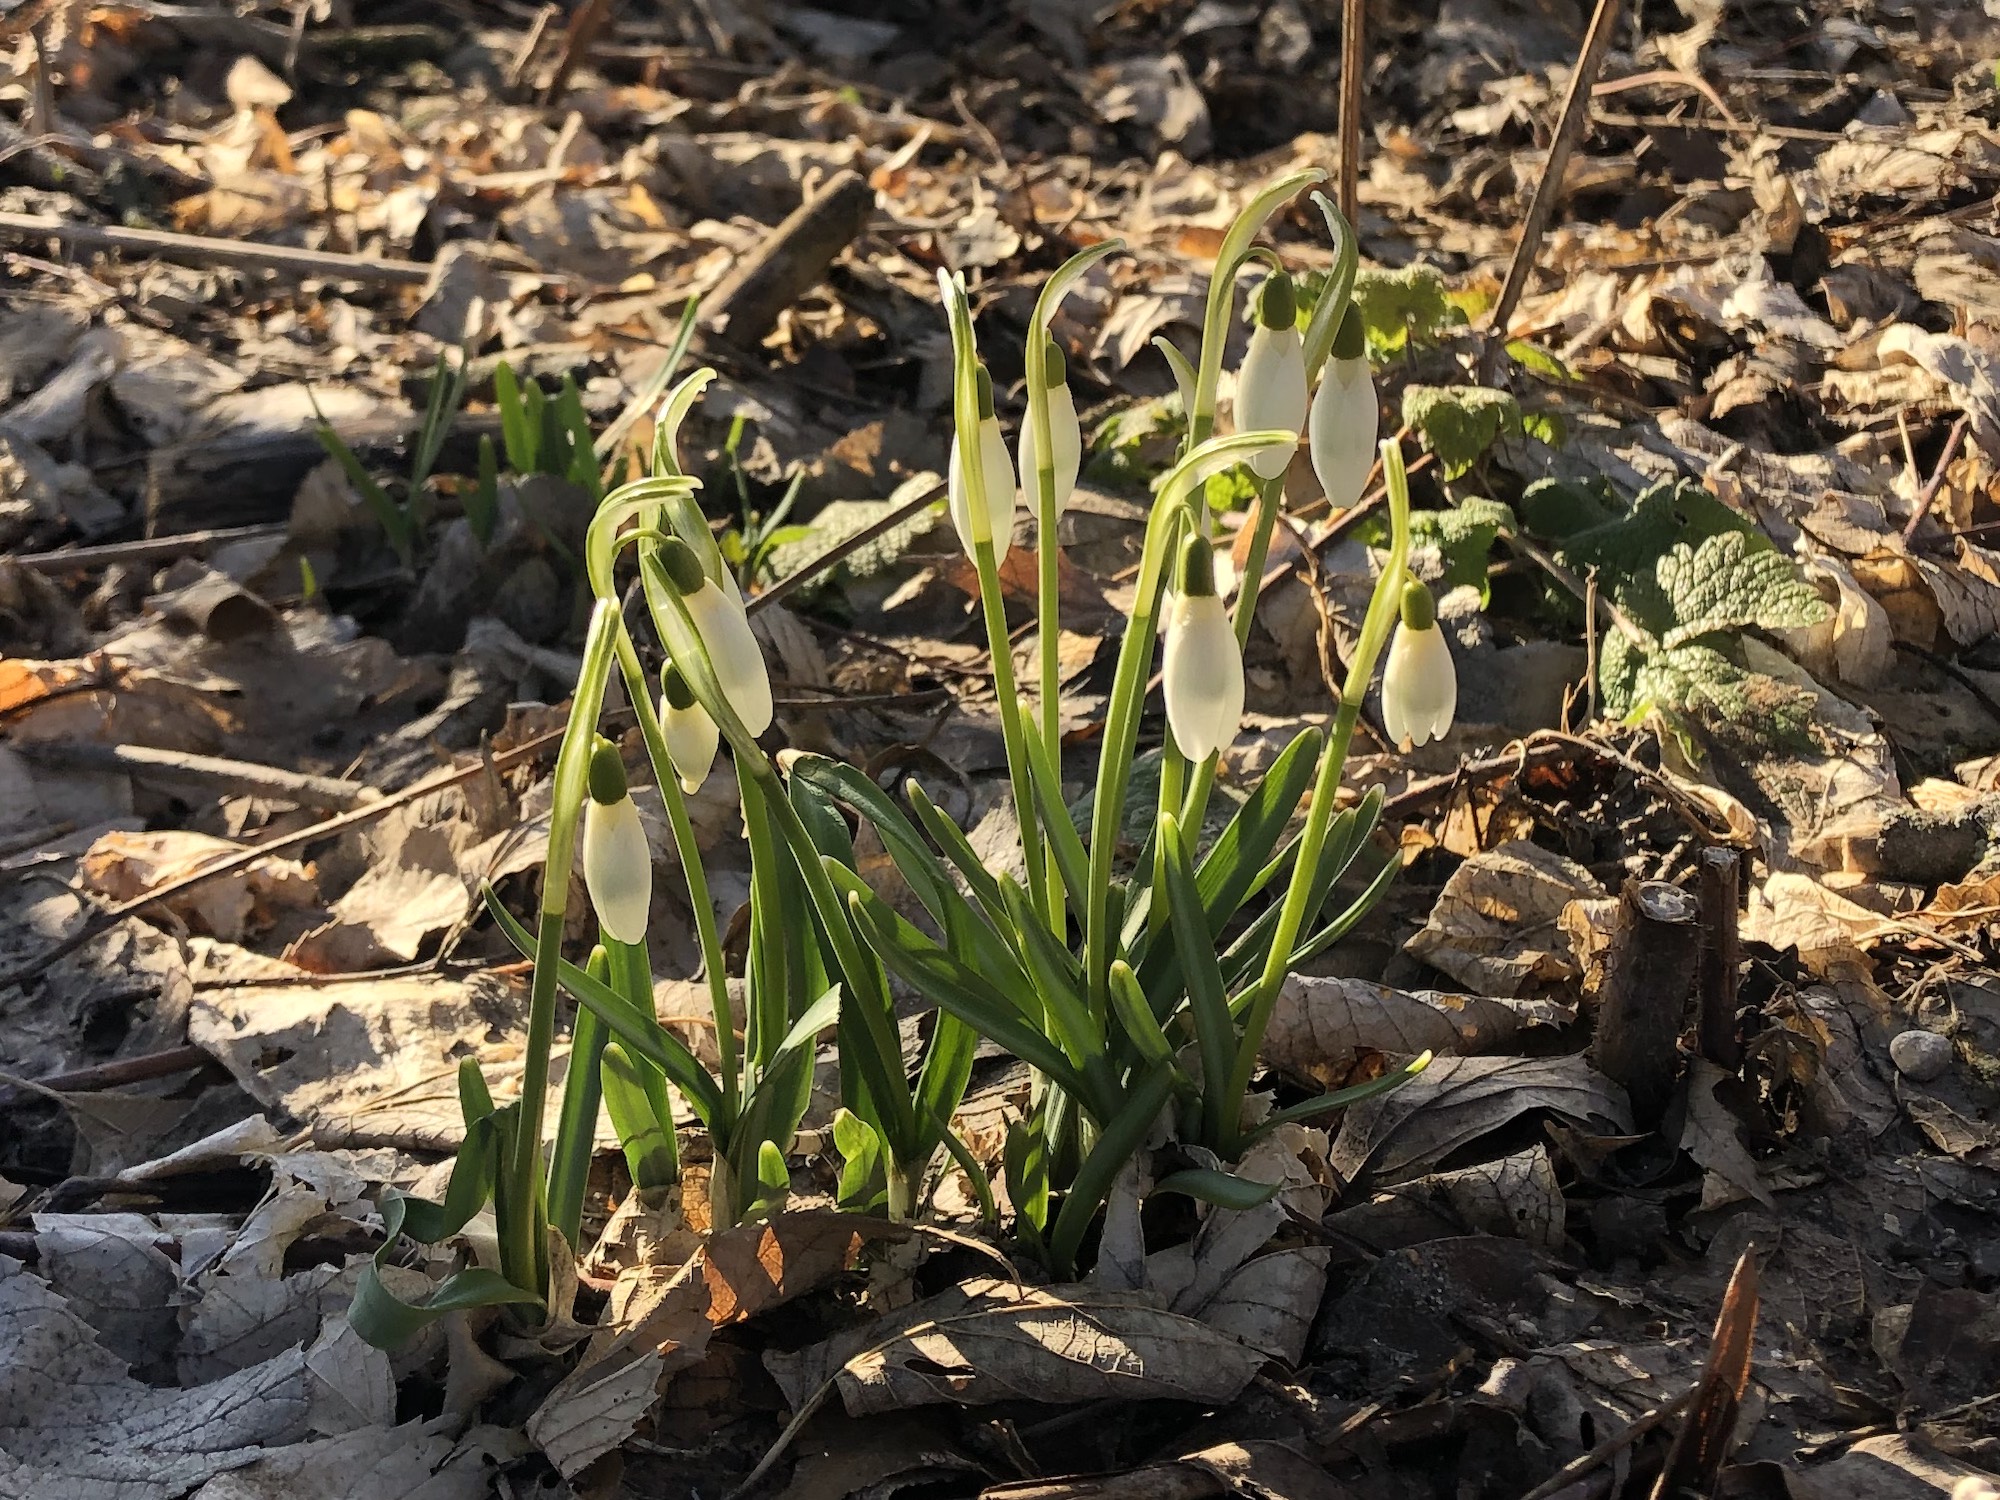 Snowdrops in Madison Wisconsin along Arbor Drive on March 7, 2023.